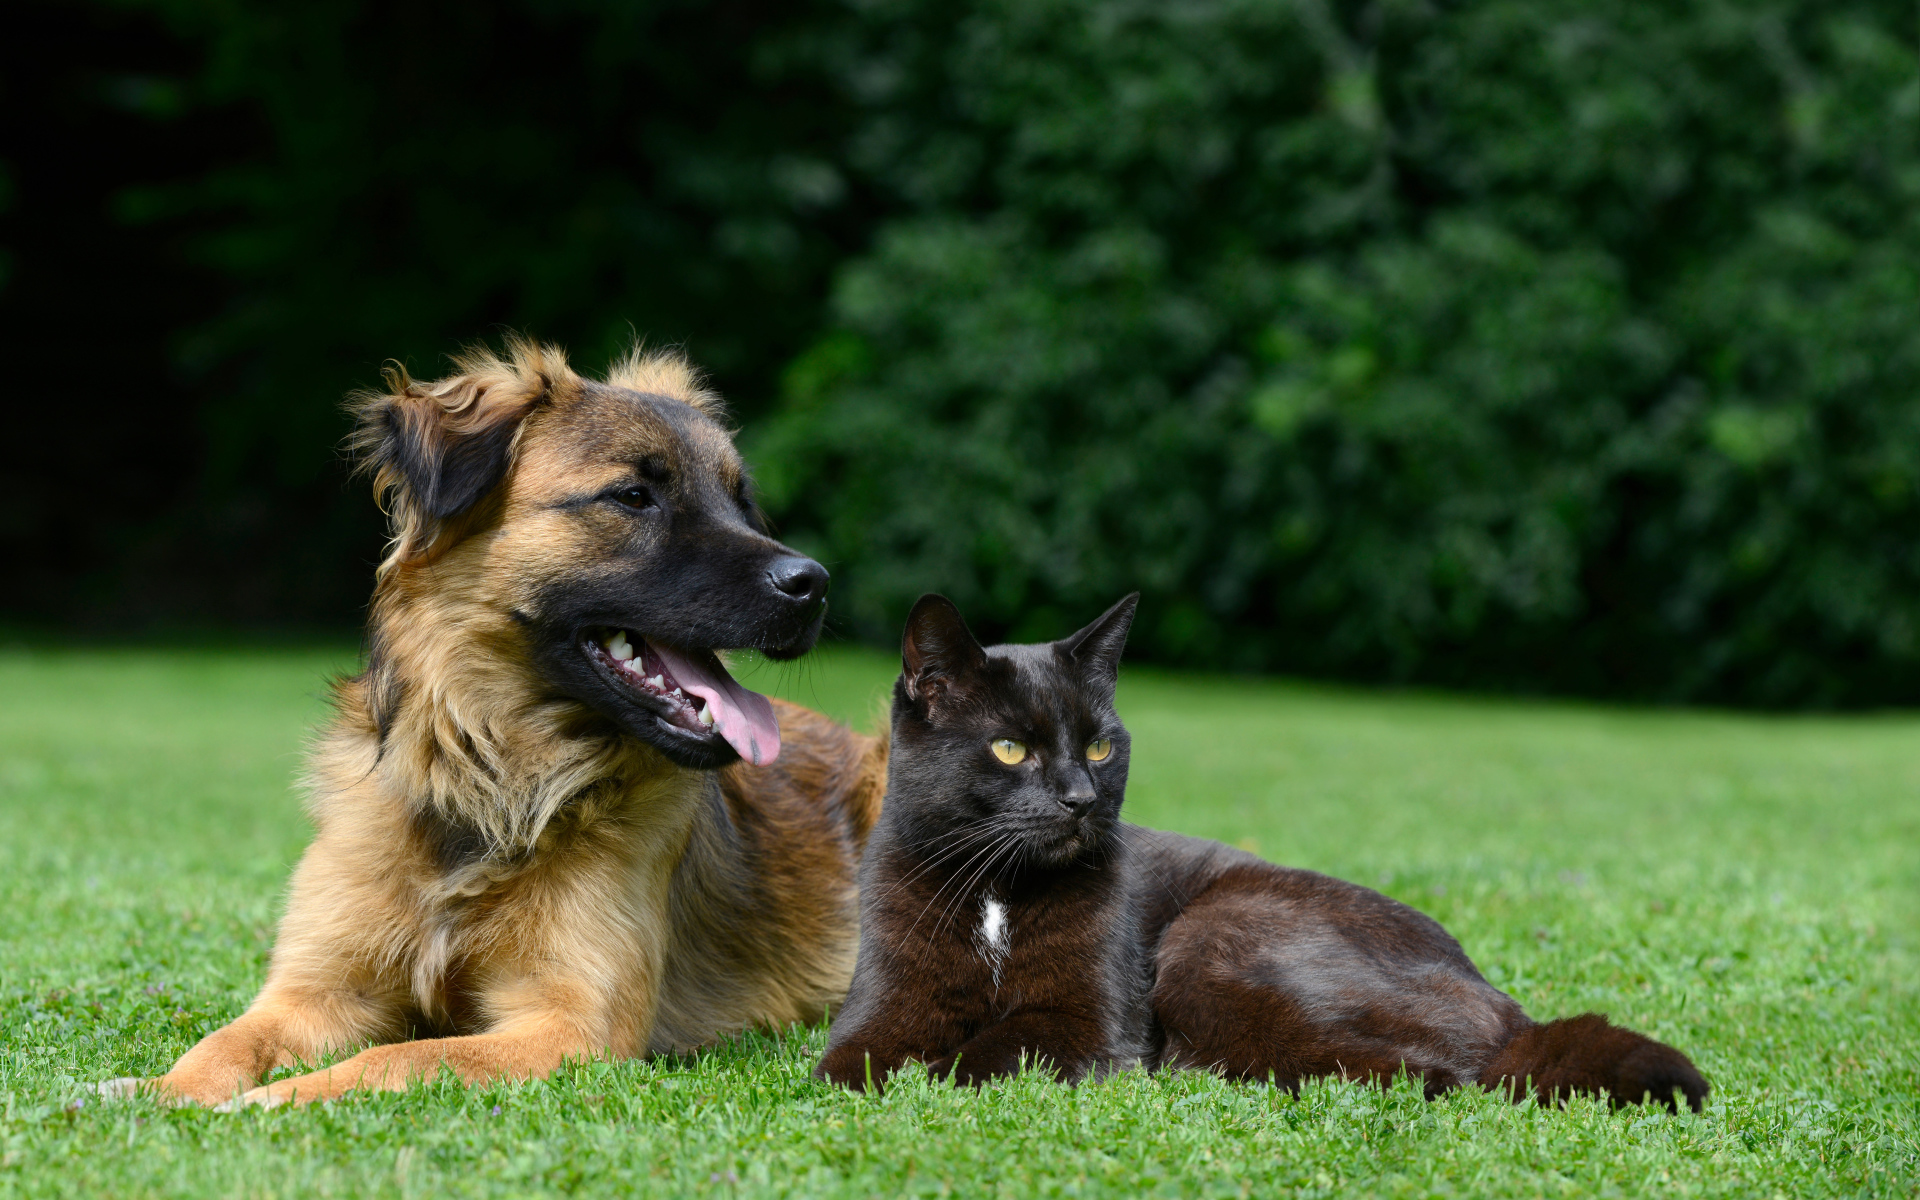 Black cat and dog lie on the green grass